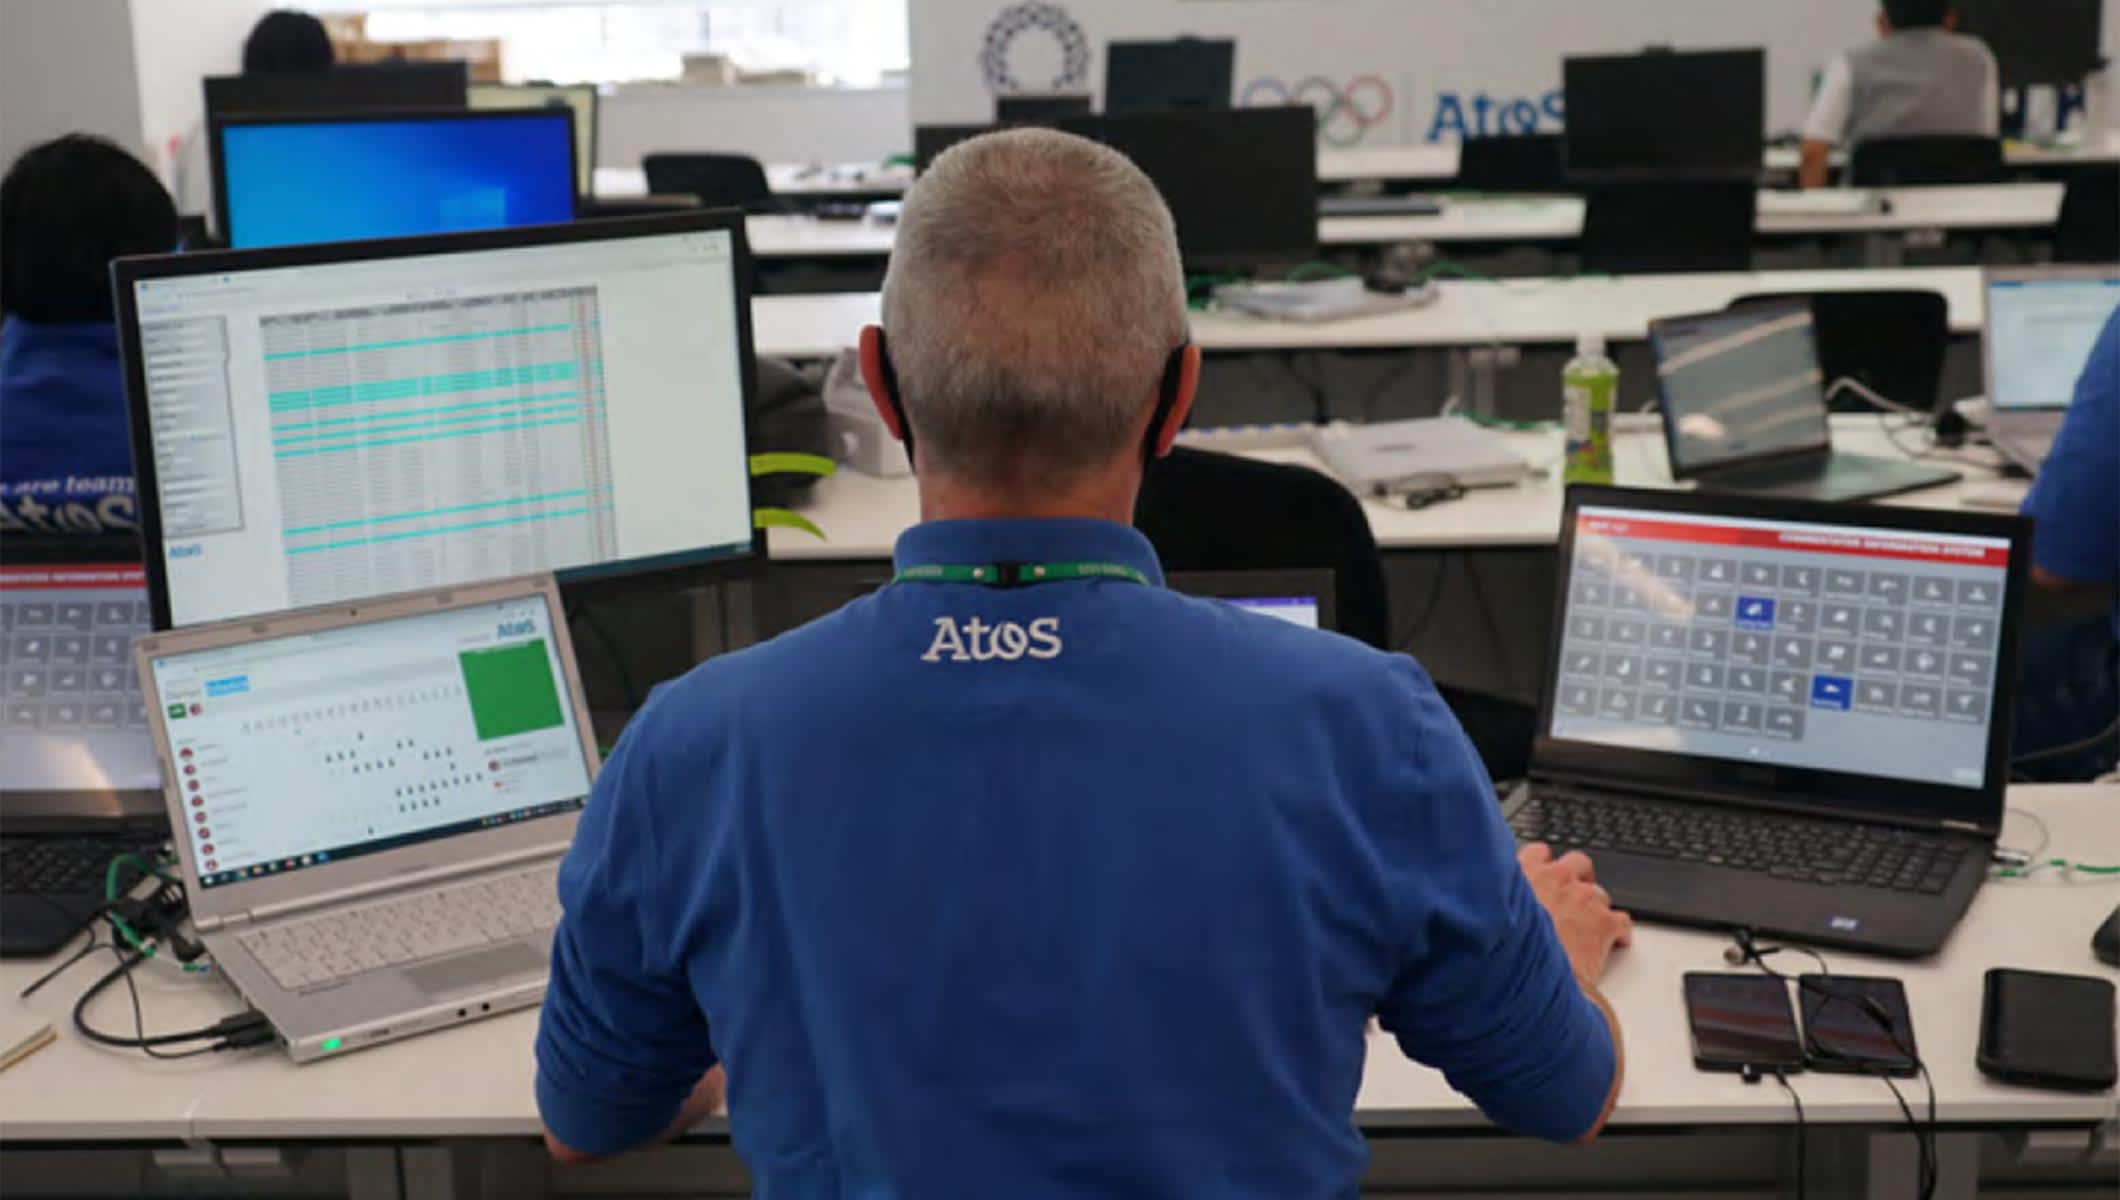 Olympic staff member working with Atos technology solutions